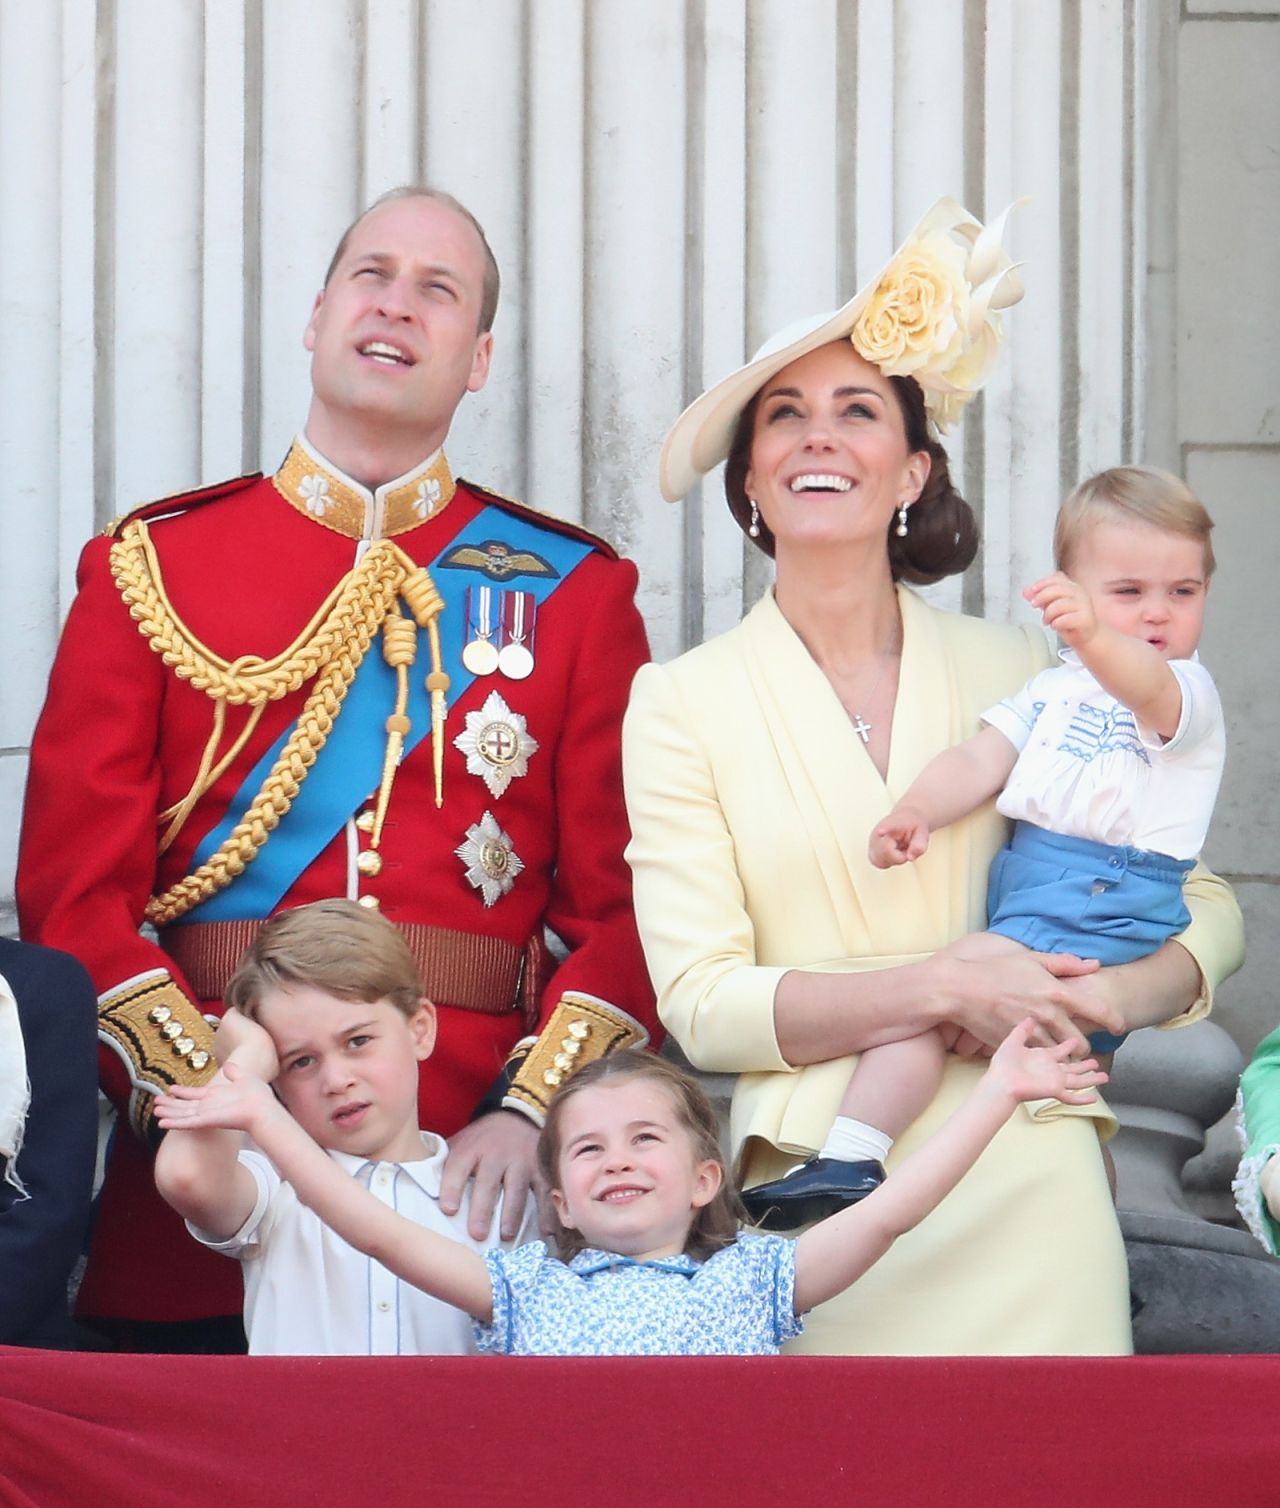 The family is photographed during Trooping the Colour, the Queen's annual birthday parade, in June 2019.